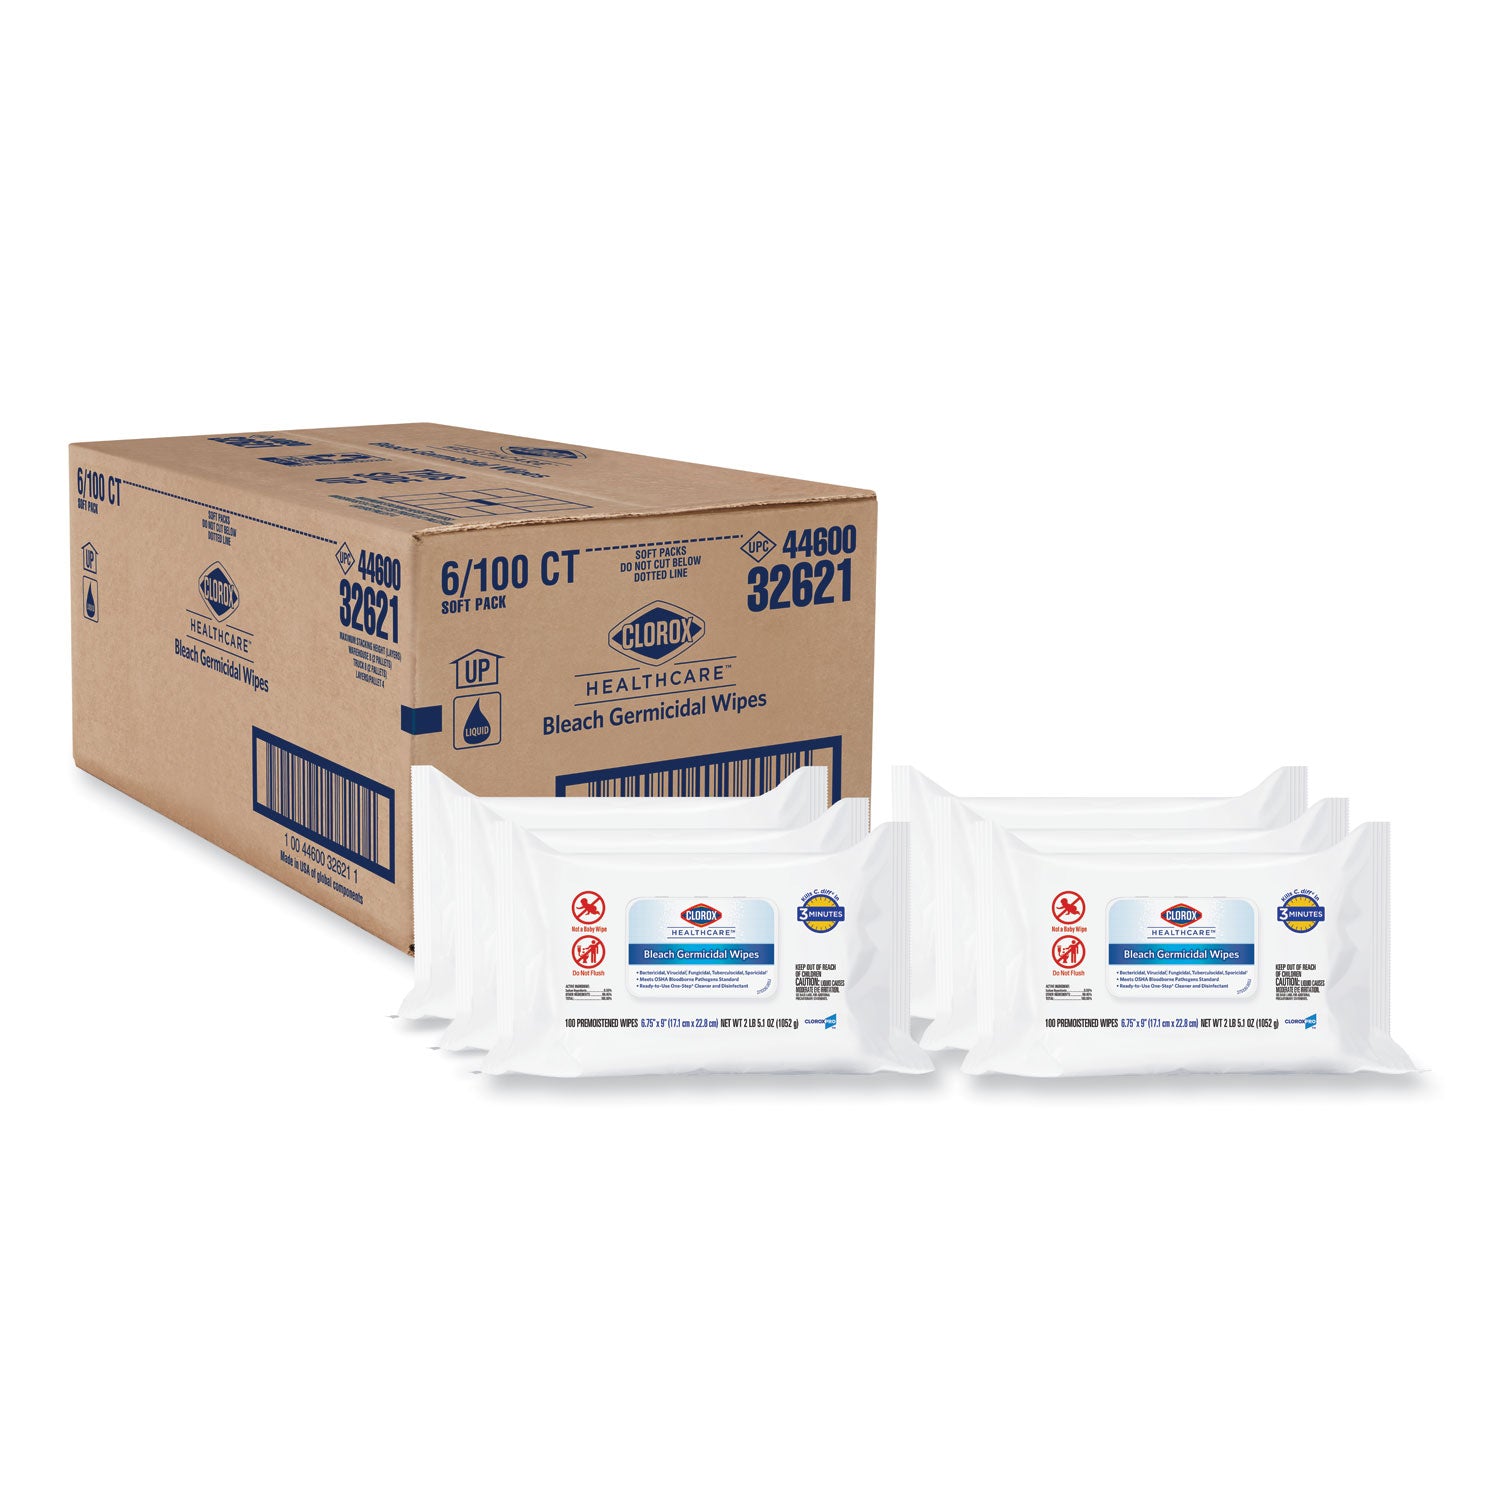 bleach-germicidal-wipes-1-ply-675-x-9-unscented-white-100-wipes-flat-pack-6-packs-carton_clo32621 - 1